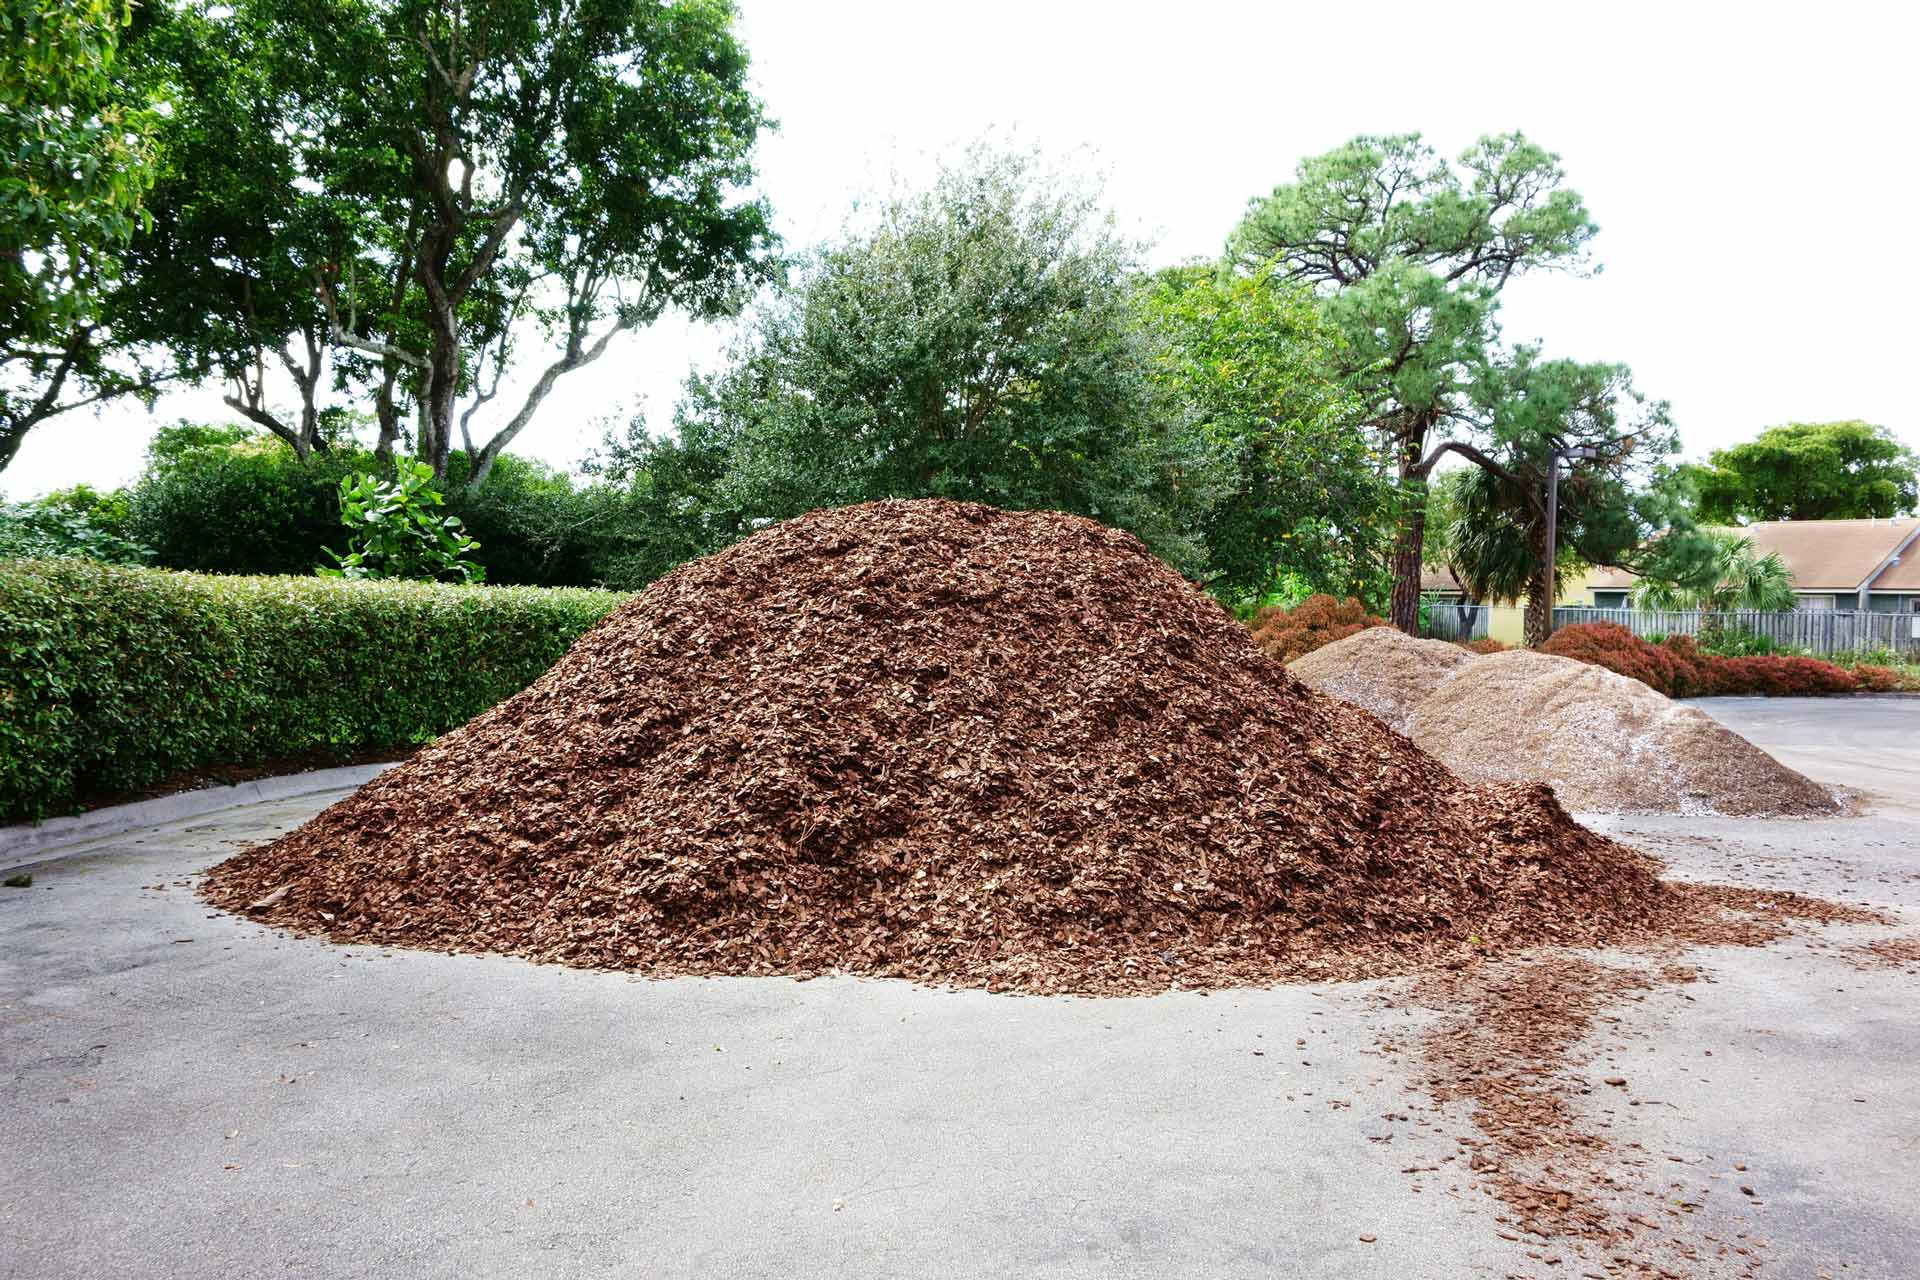 A Large Pile of Shredded Pine Bark Has Been Dumped in a Parking Lot | Tahmoor, Nsw | Mark’s Landscape Supplies